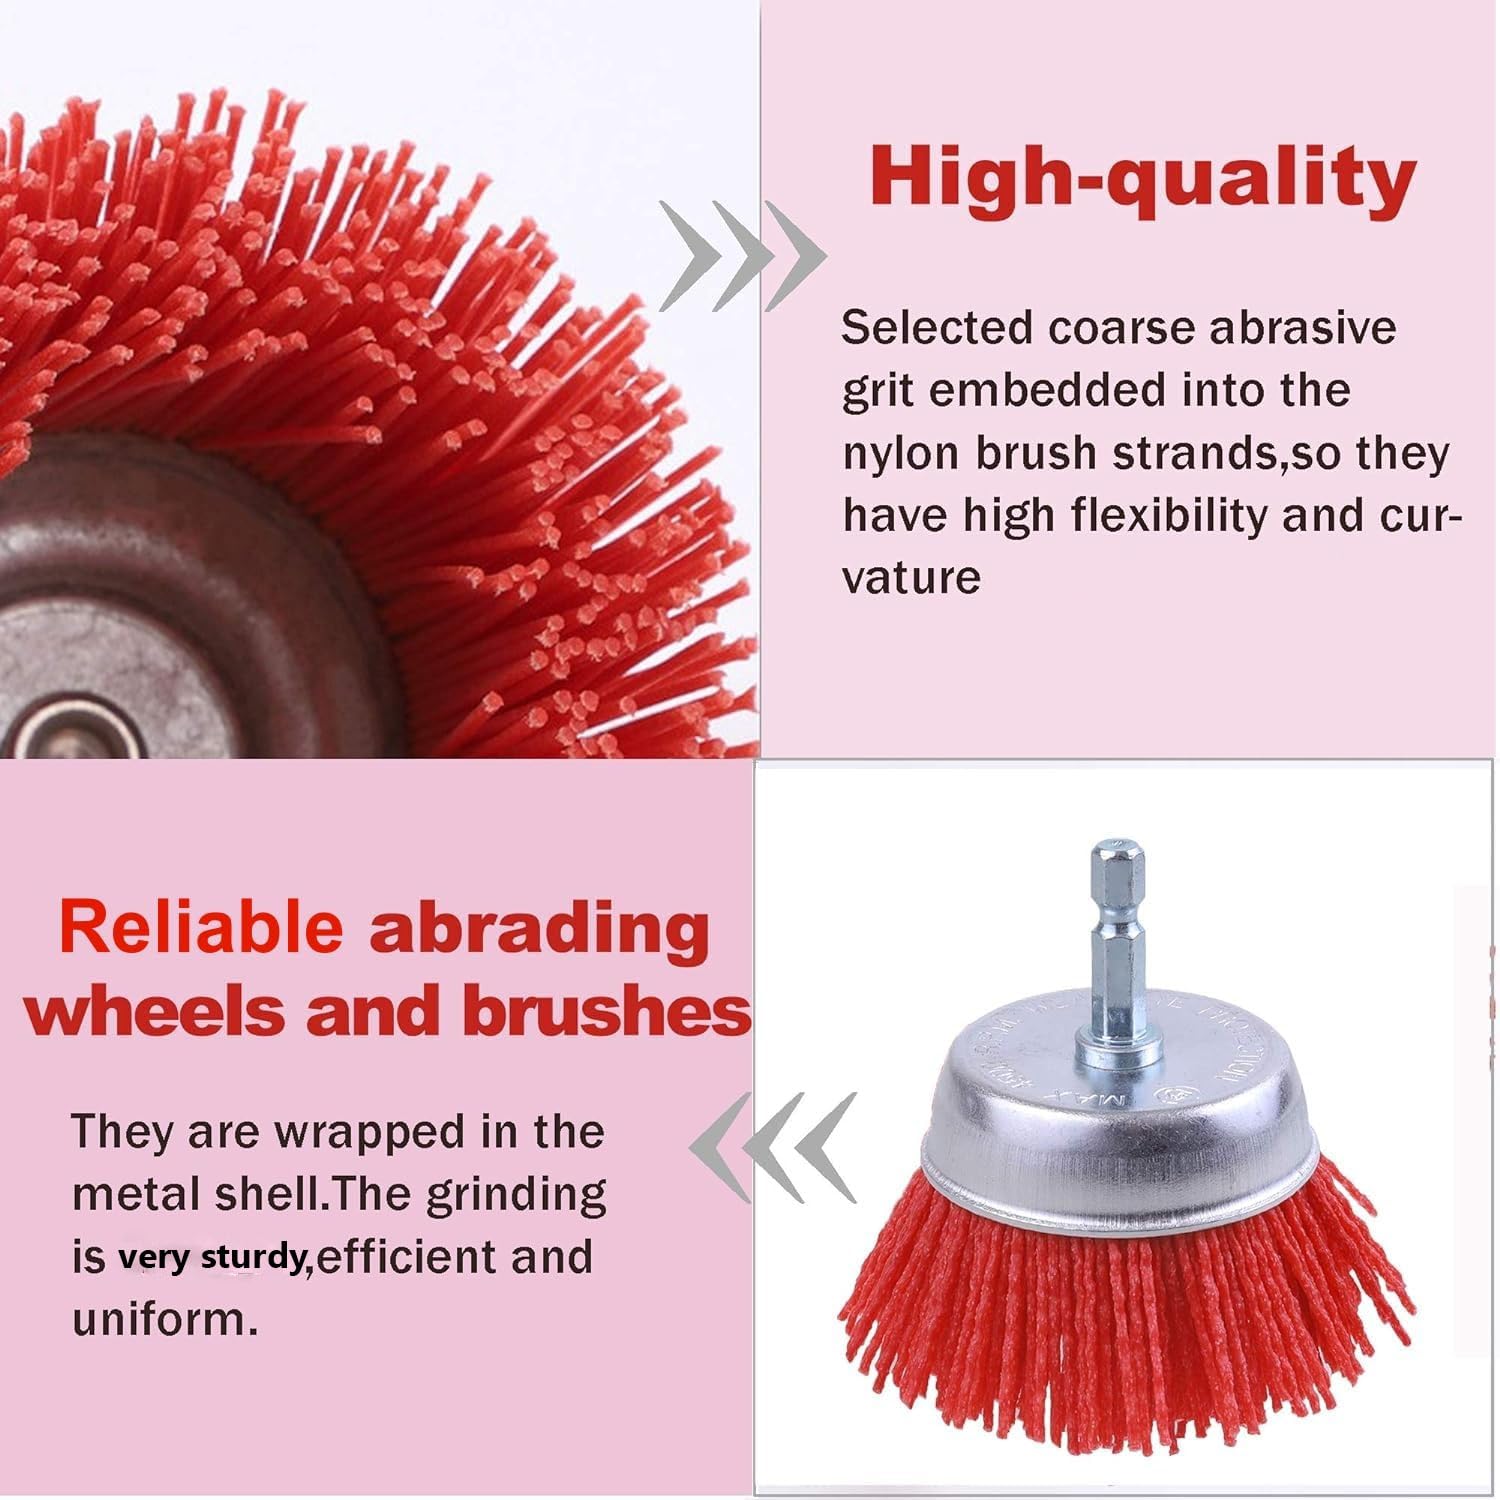 Rocaris 9 Pack Nylon Filament Abrasive Wire Brush Wheel & Cup Brush Set with 1/4 Inch Hex Shank, for Removal of Rust/Corrosion/Paint - 80 Grit, 120 Grit, 240 Grit